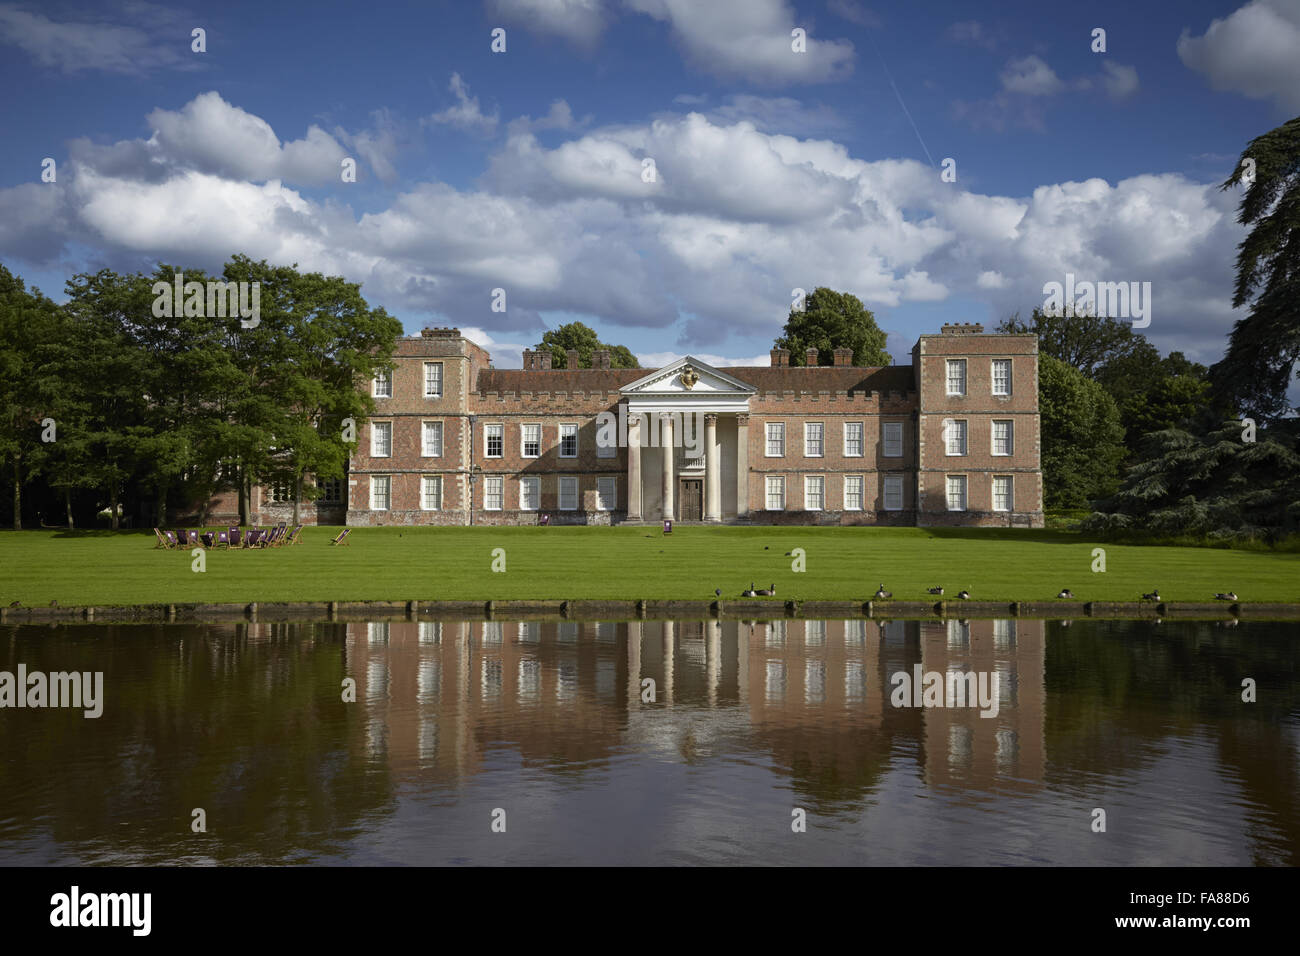 View of the north front of The Vyne and the lake. The house was built in the early 16th century for Lord Sandys, Henry VIII's Lord Chamberlain in 1526. Stock Photo